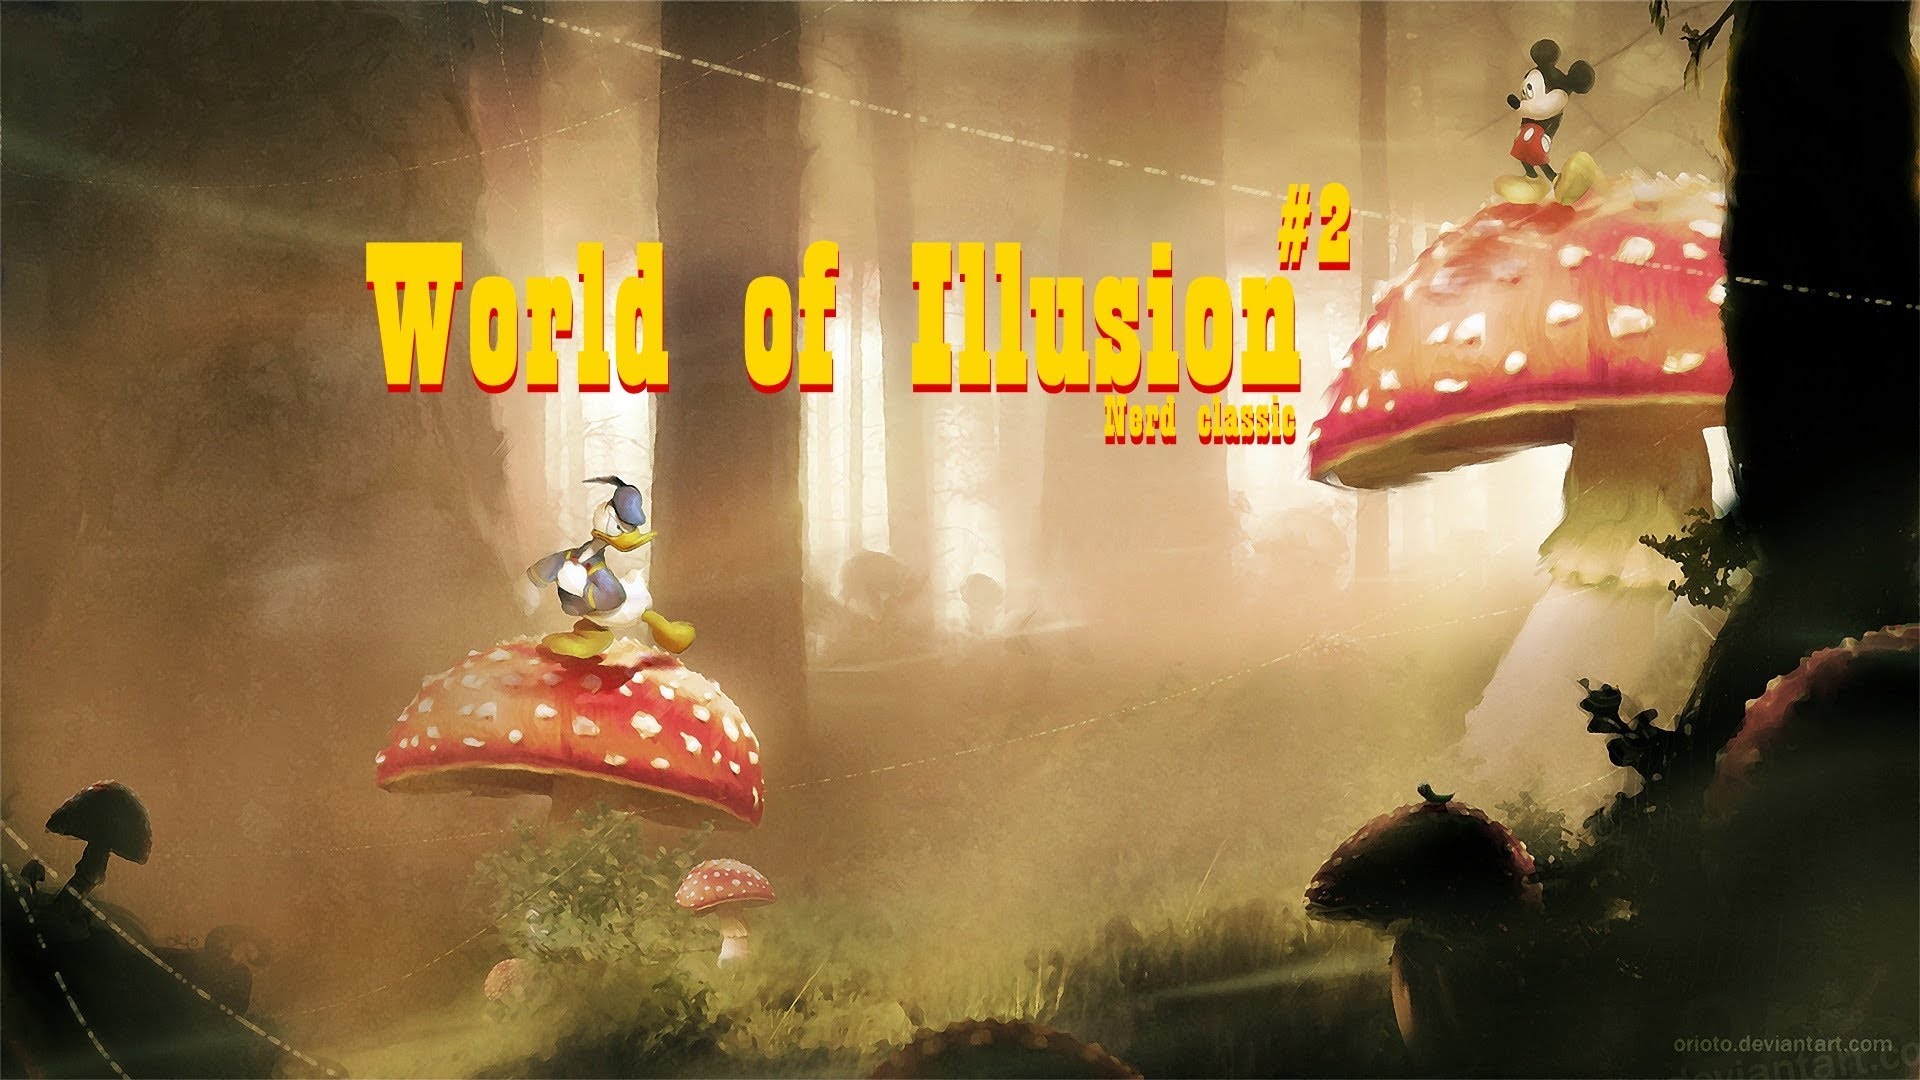 World Of Illusion Starring Mickey Mouse And Donald Duck Backgrounds, Compatible - PC, Mobile, Gadgets| 1920x1080 px